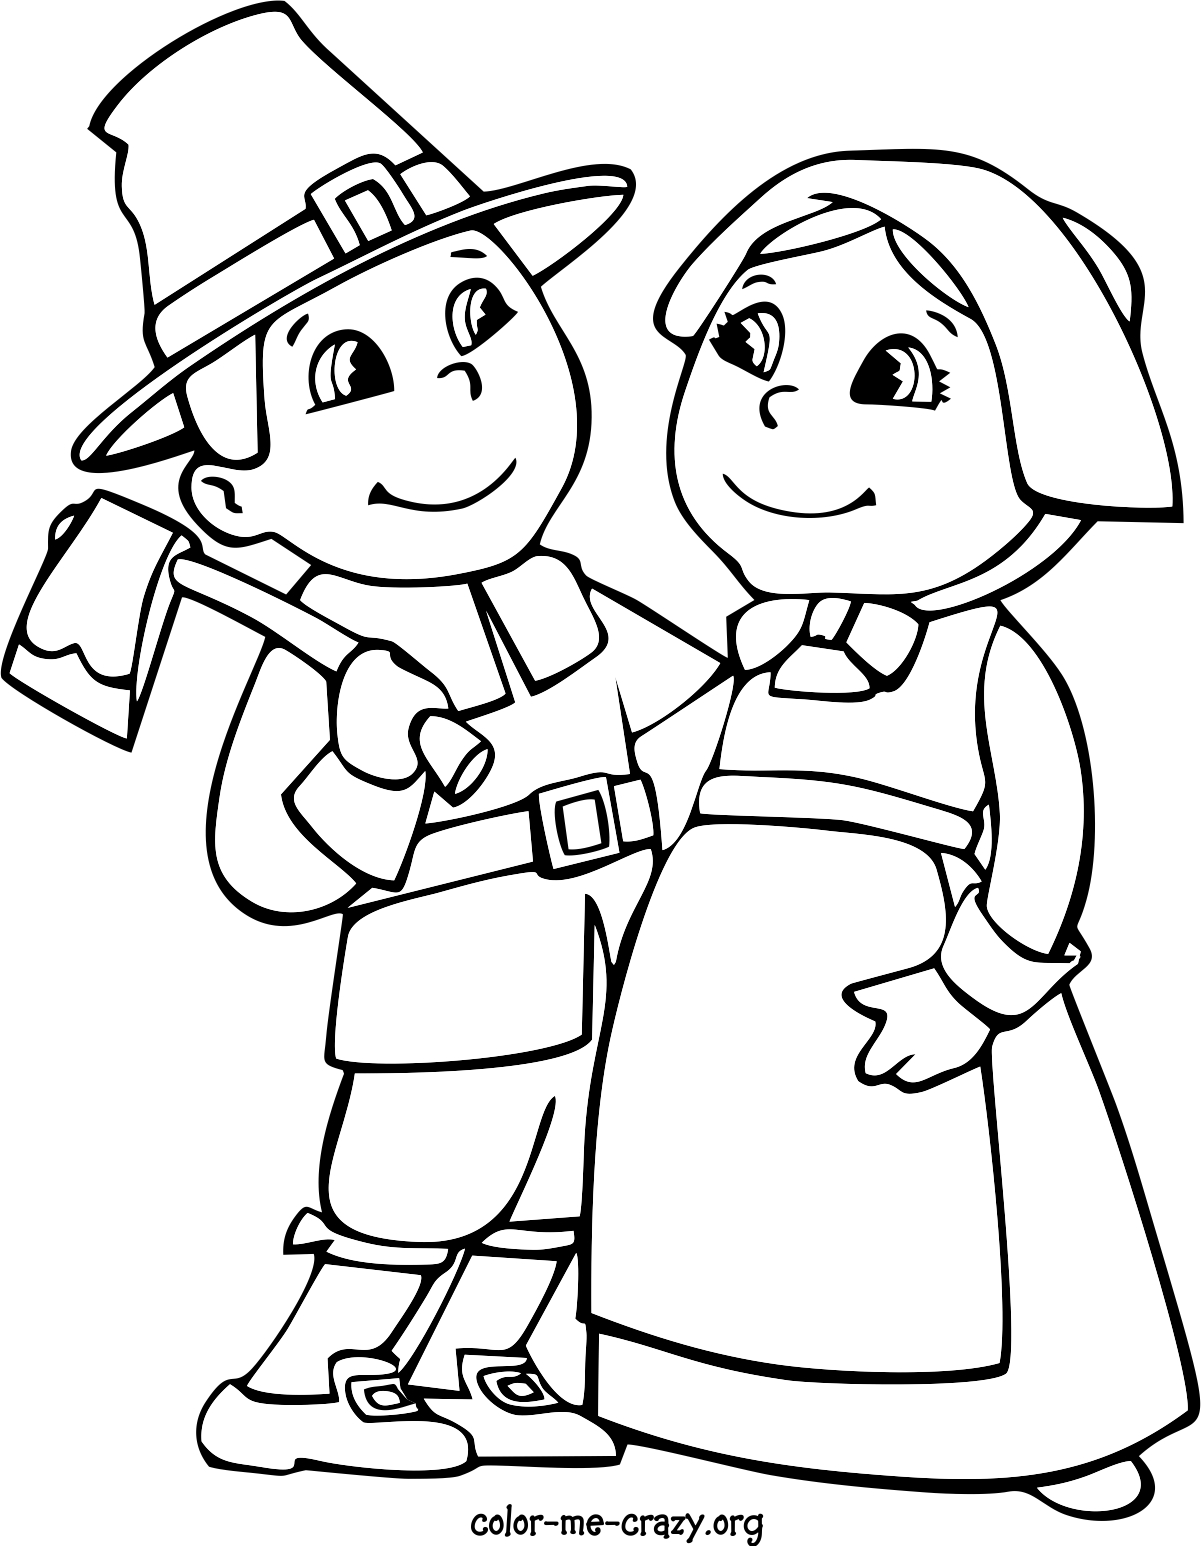 ColorMeCrazy.org: Thanksgiving Coloring Pages